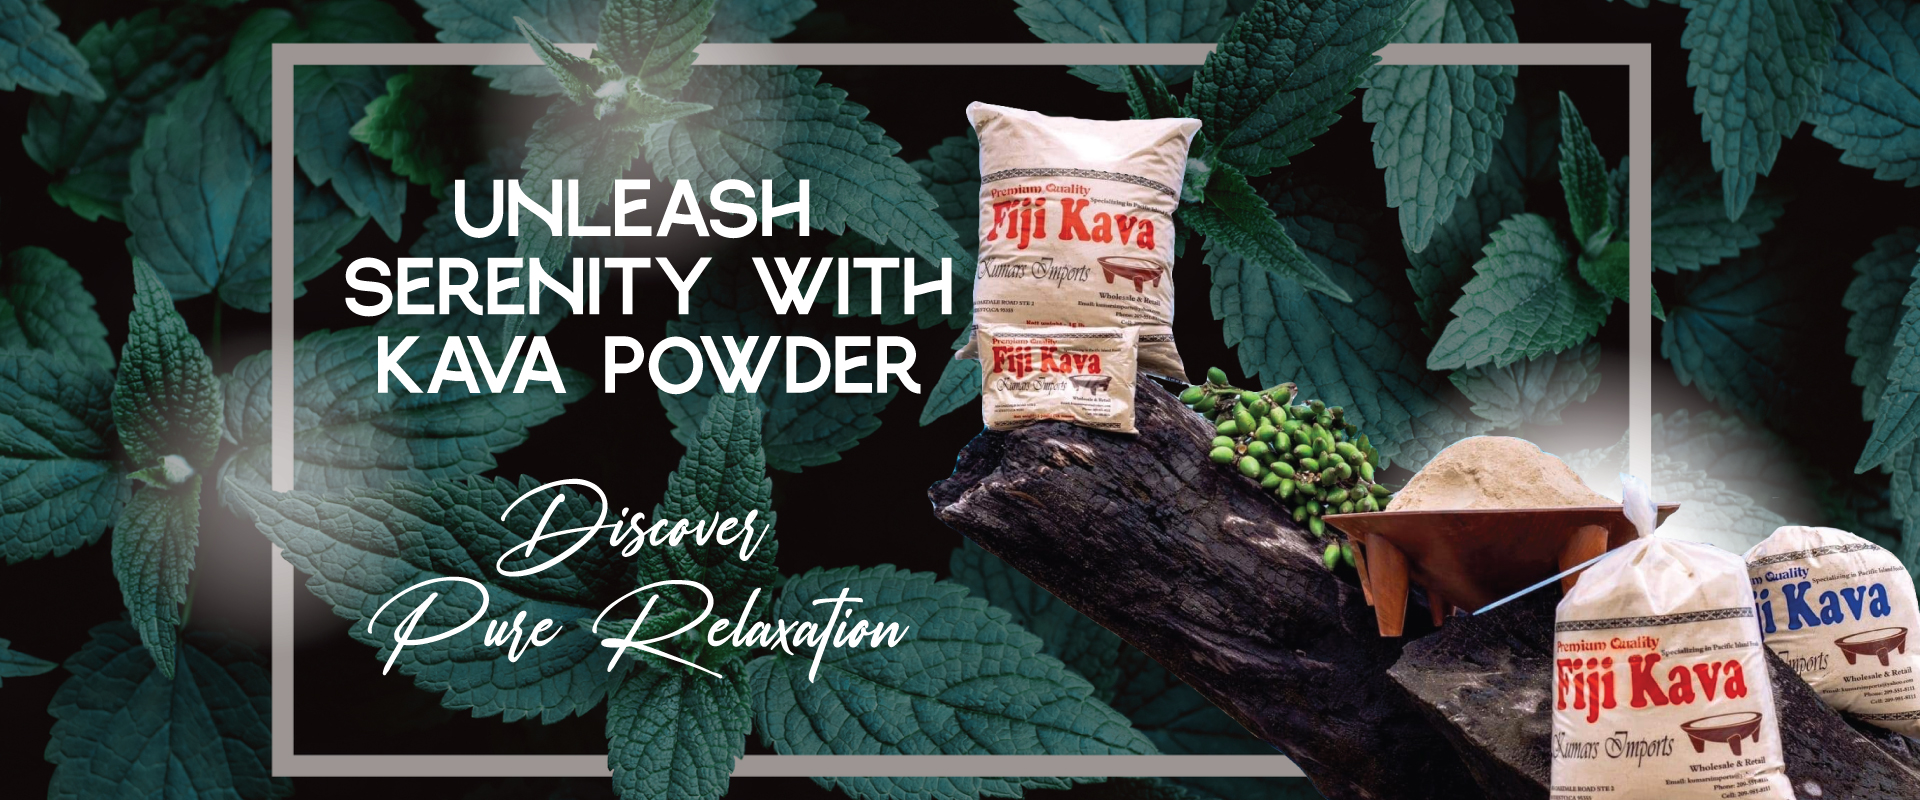 Unleash Serenity With Kava Power